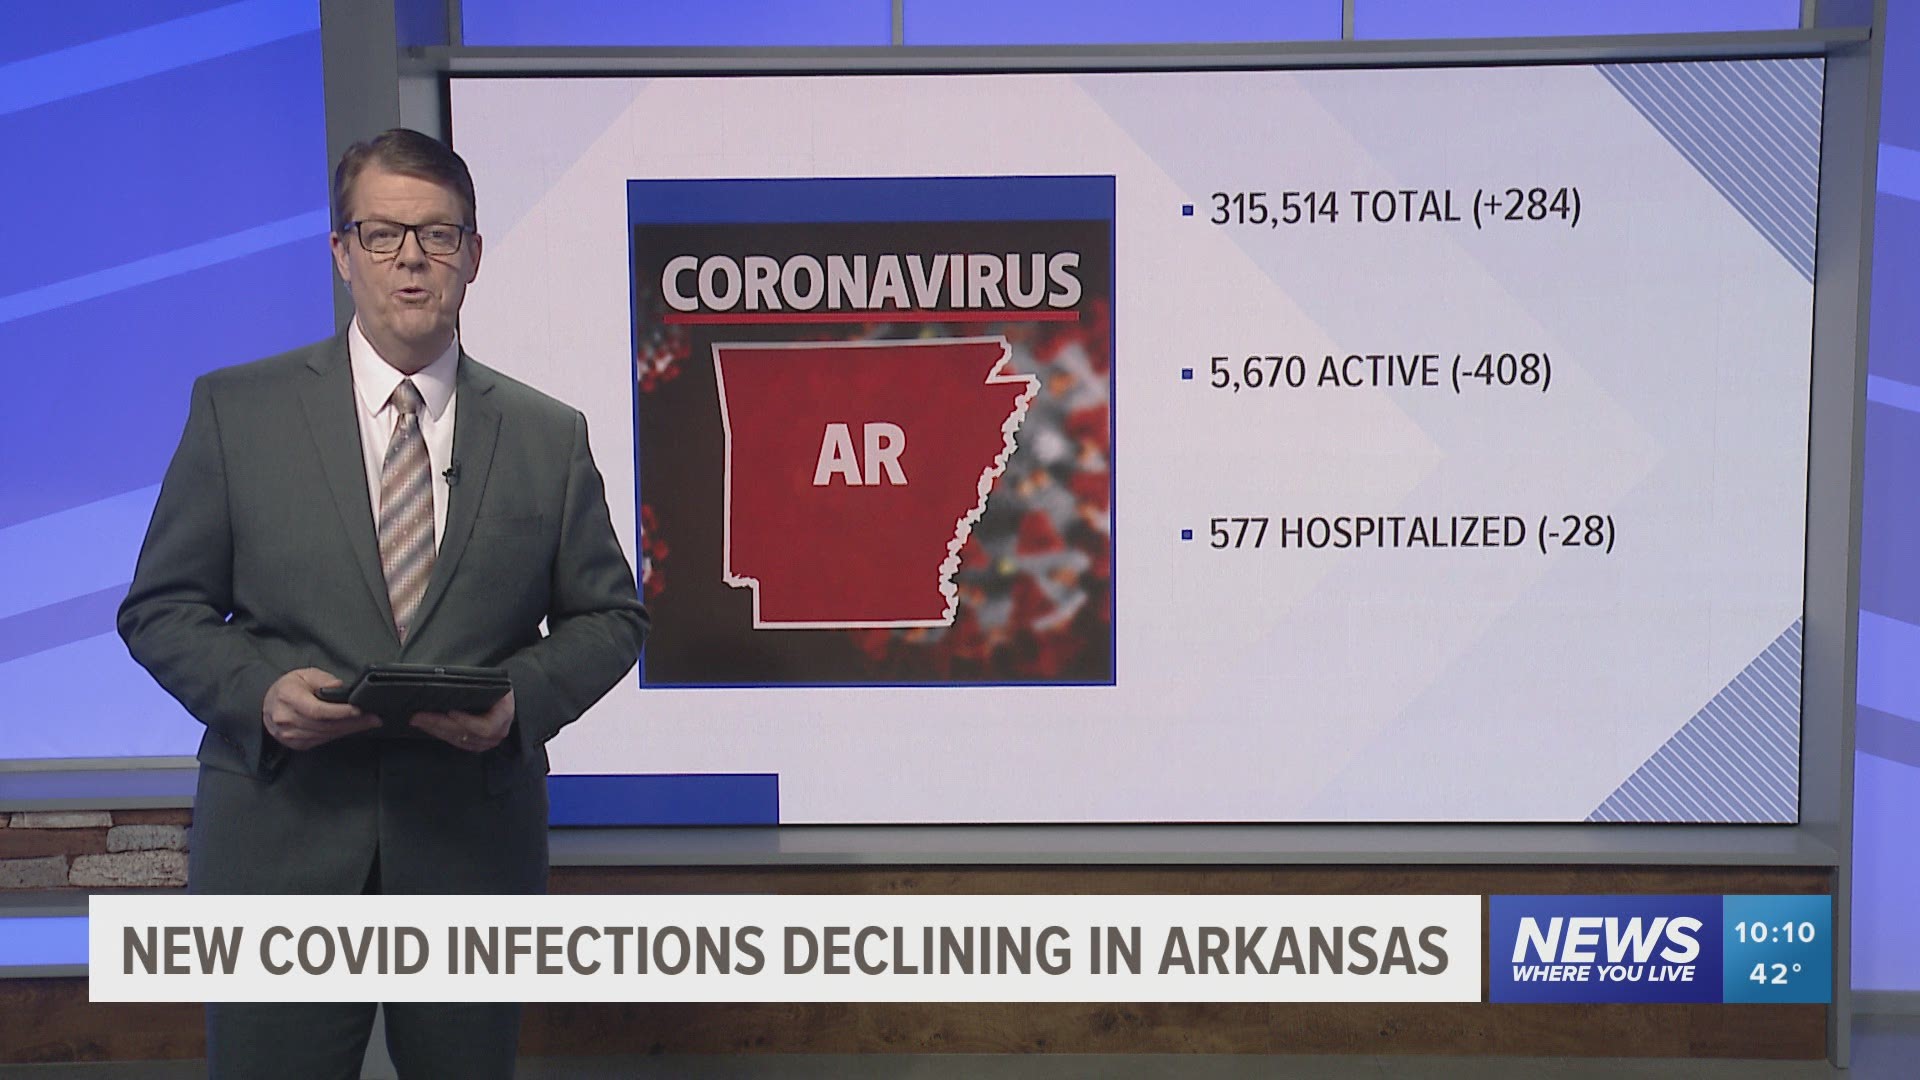 The Arkansas Department of Health (ADH) reported 284 new COVID-19 cases on Sunday.